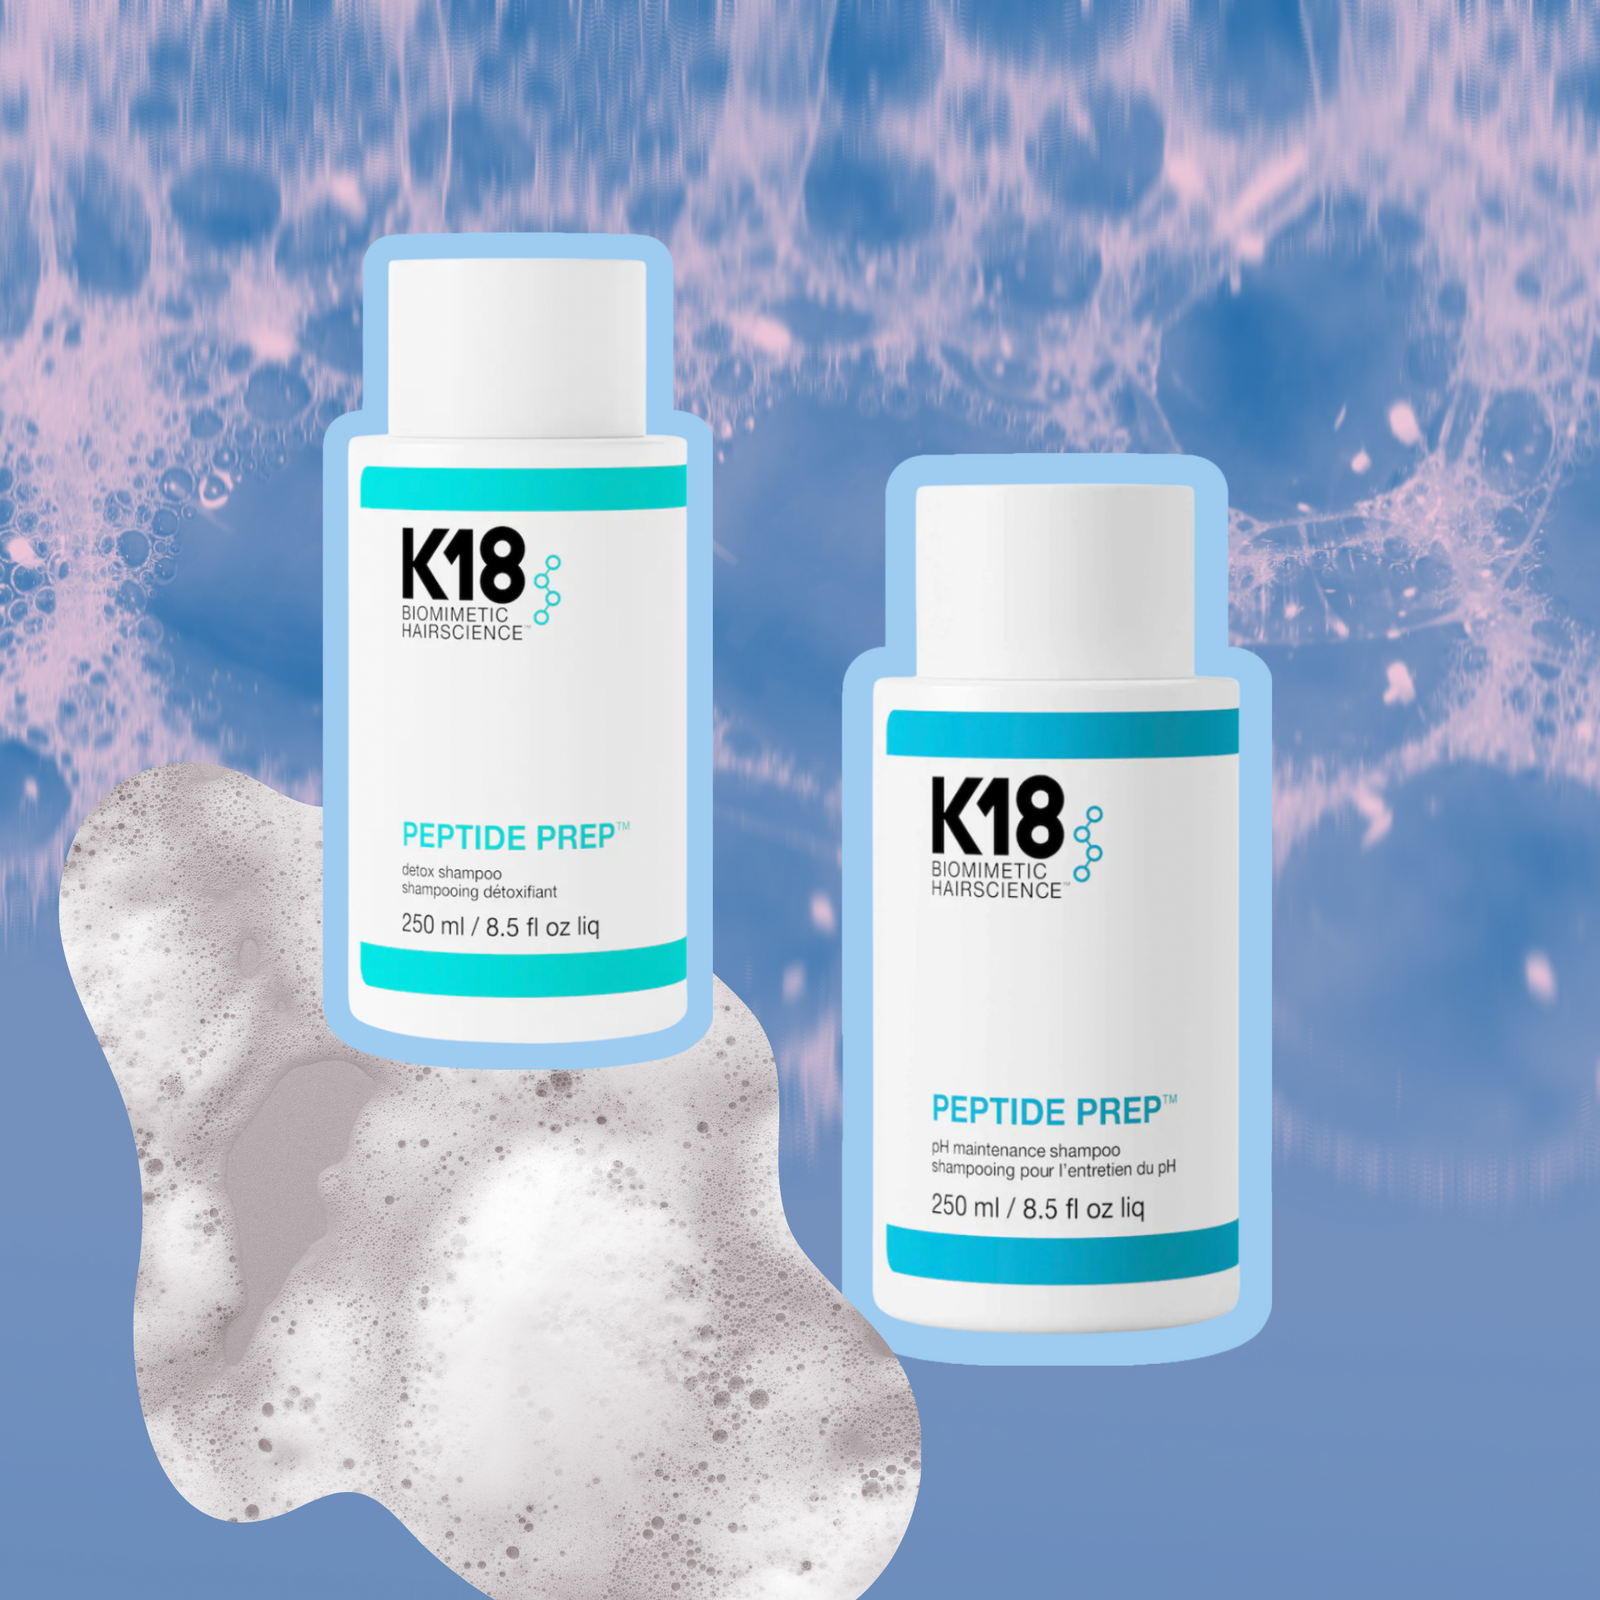 K18 released two new shampoos, and now I don’t need conditioner anymore